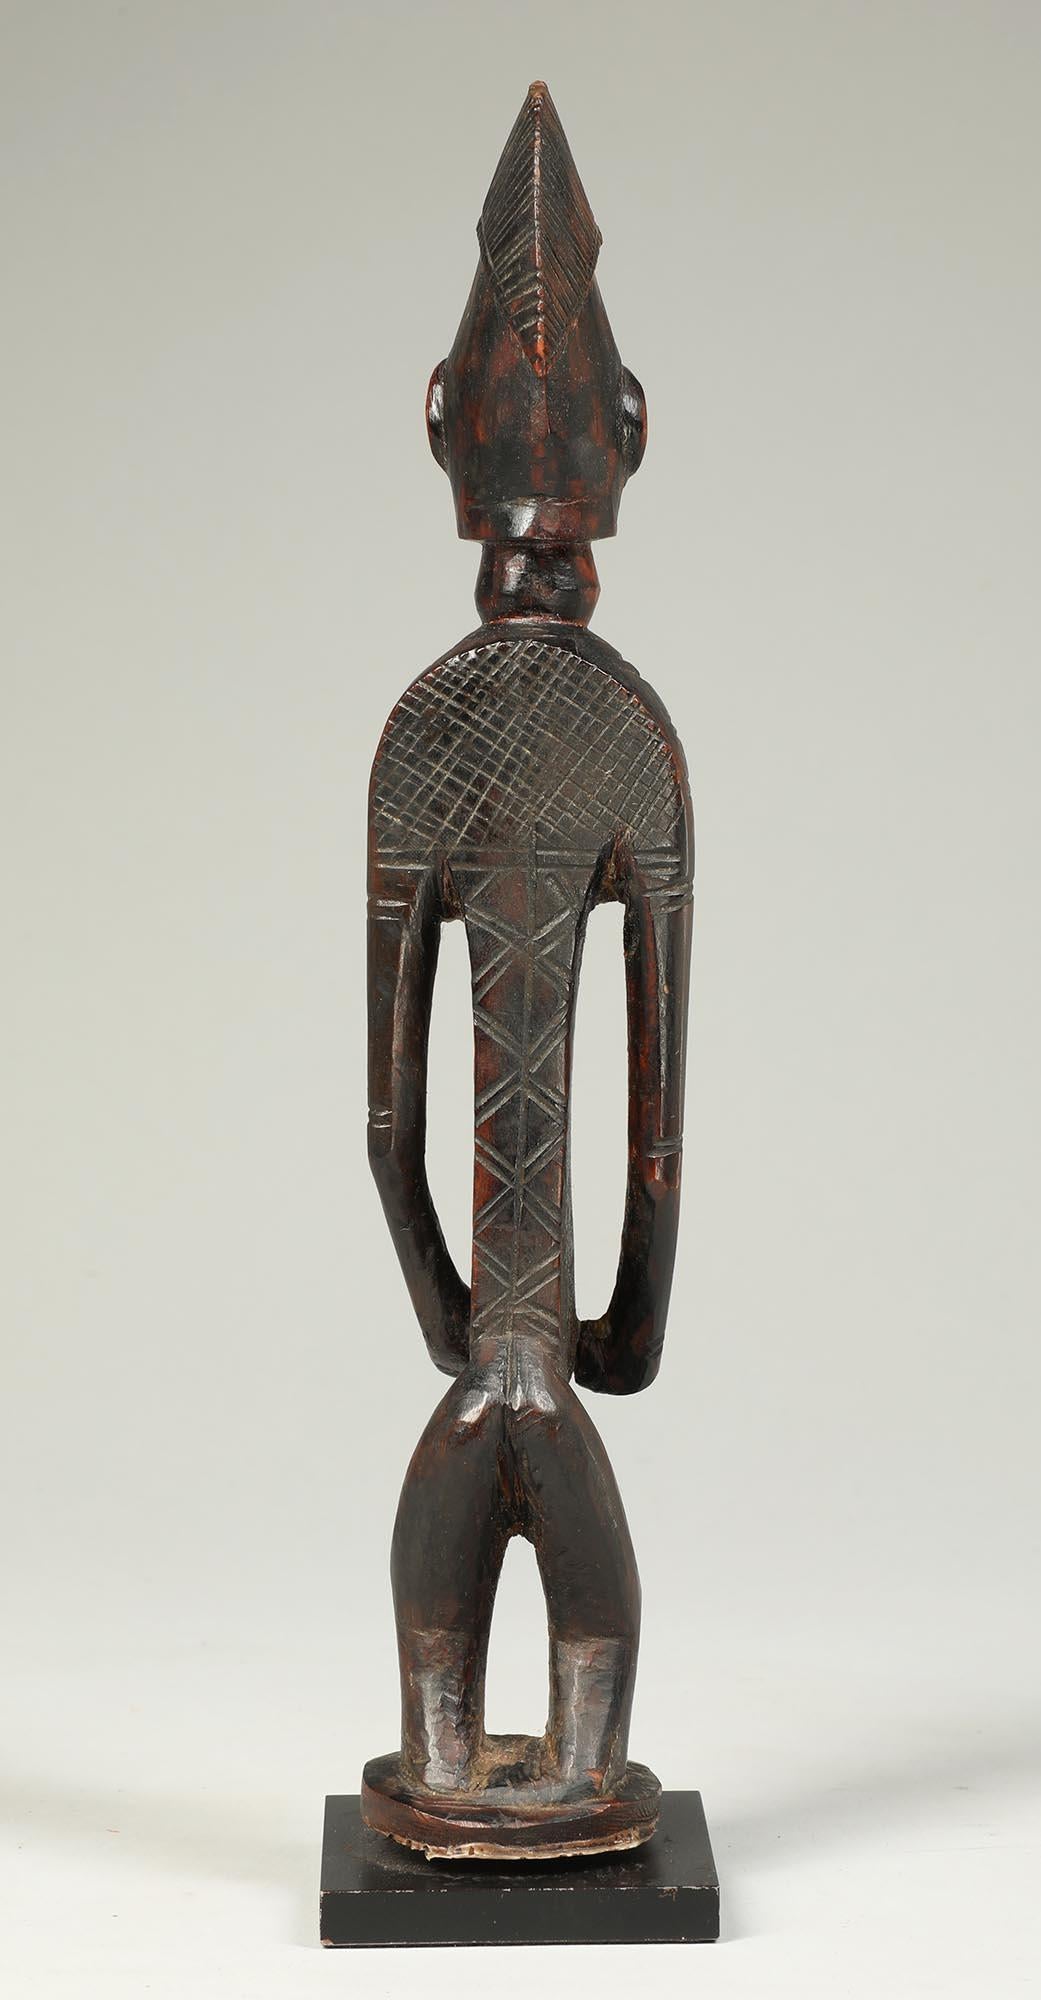 Early Standing Bambara or Malinke Female Figure Deep Patina, Mali West Africa In Good Condition For Sale In Point Richmond, CA